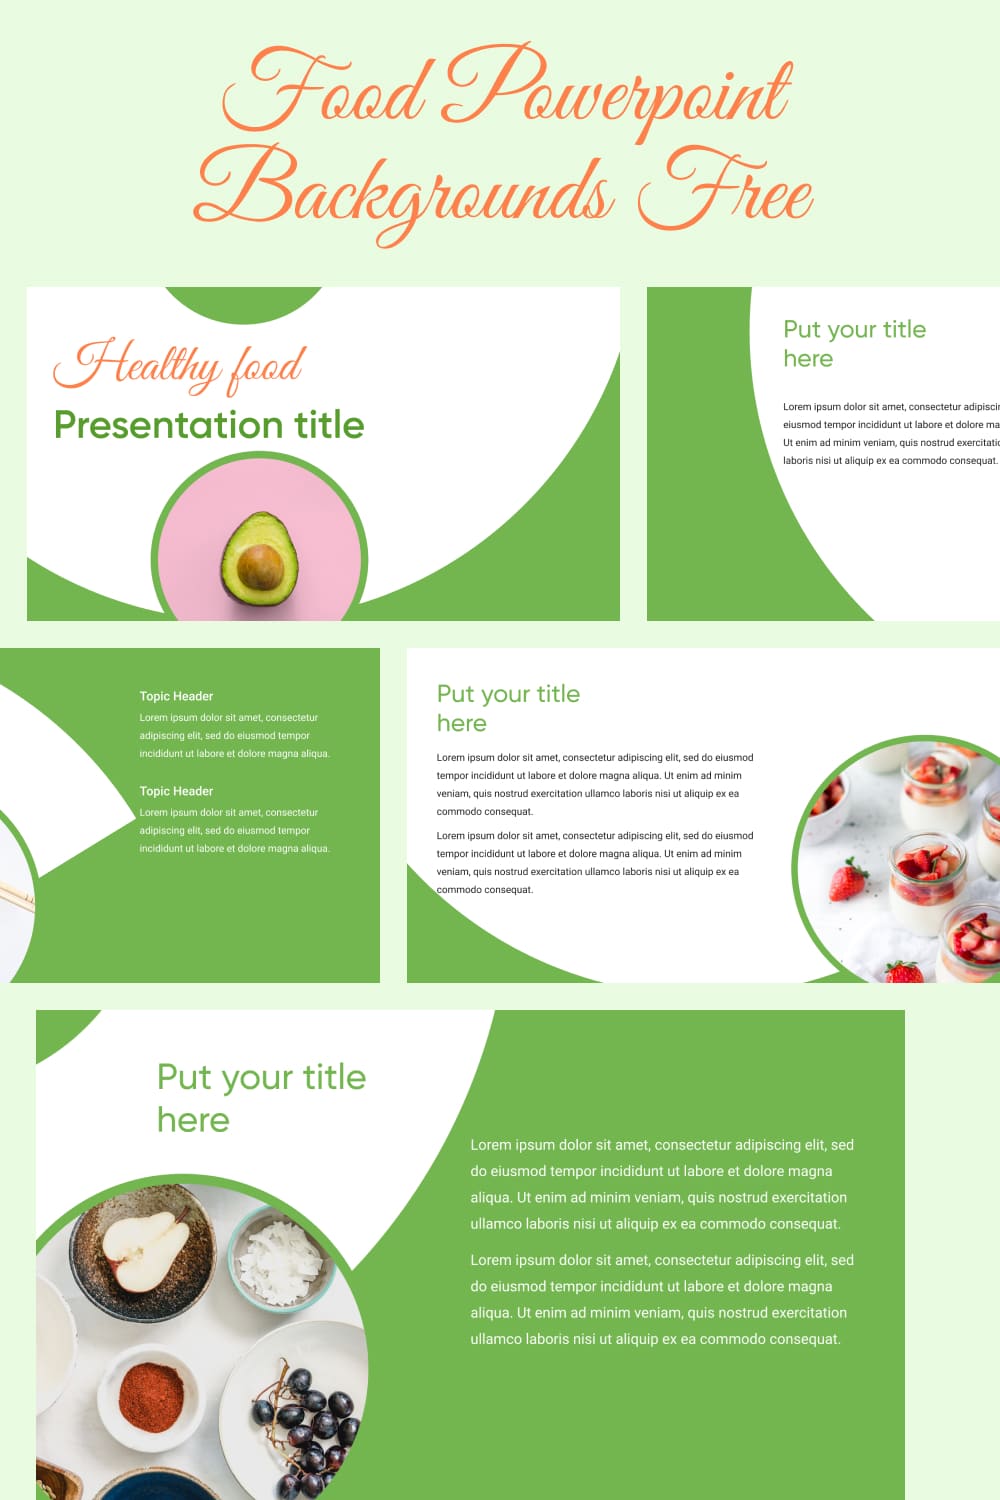 Food Powerpoint Backgrounds Free 1500 1500 2.